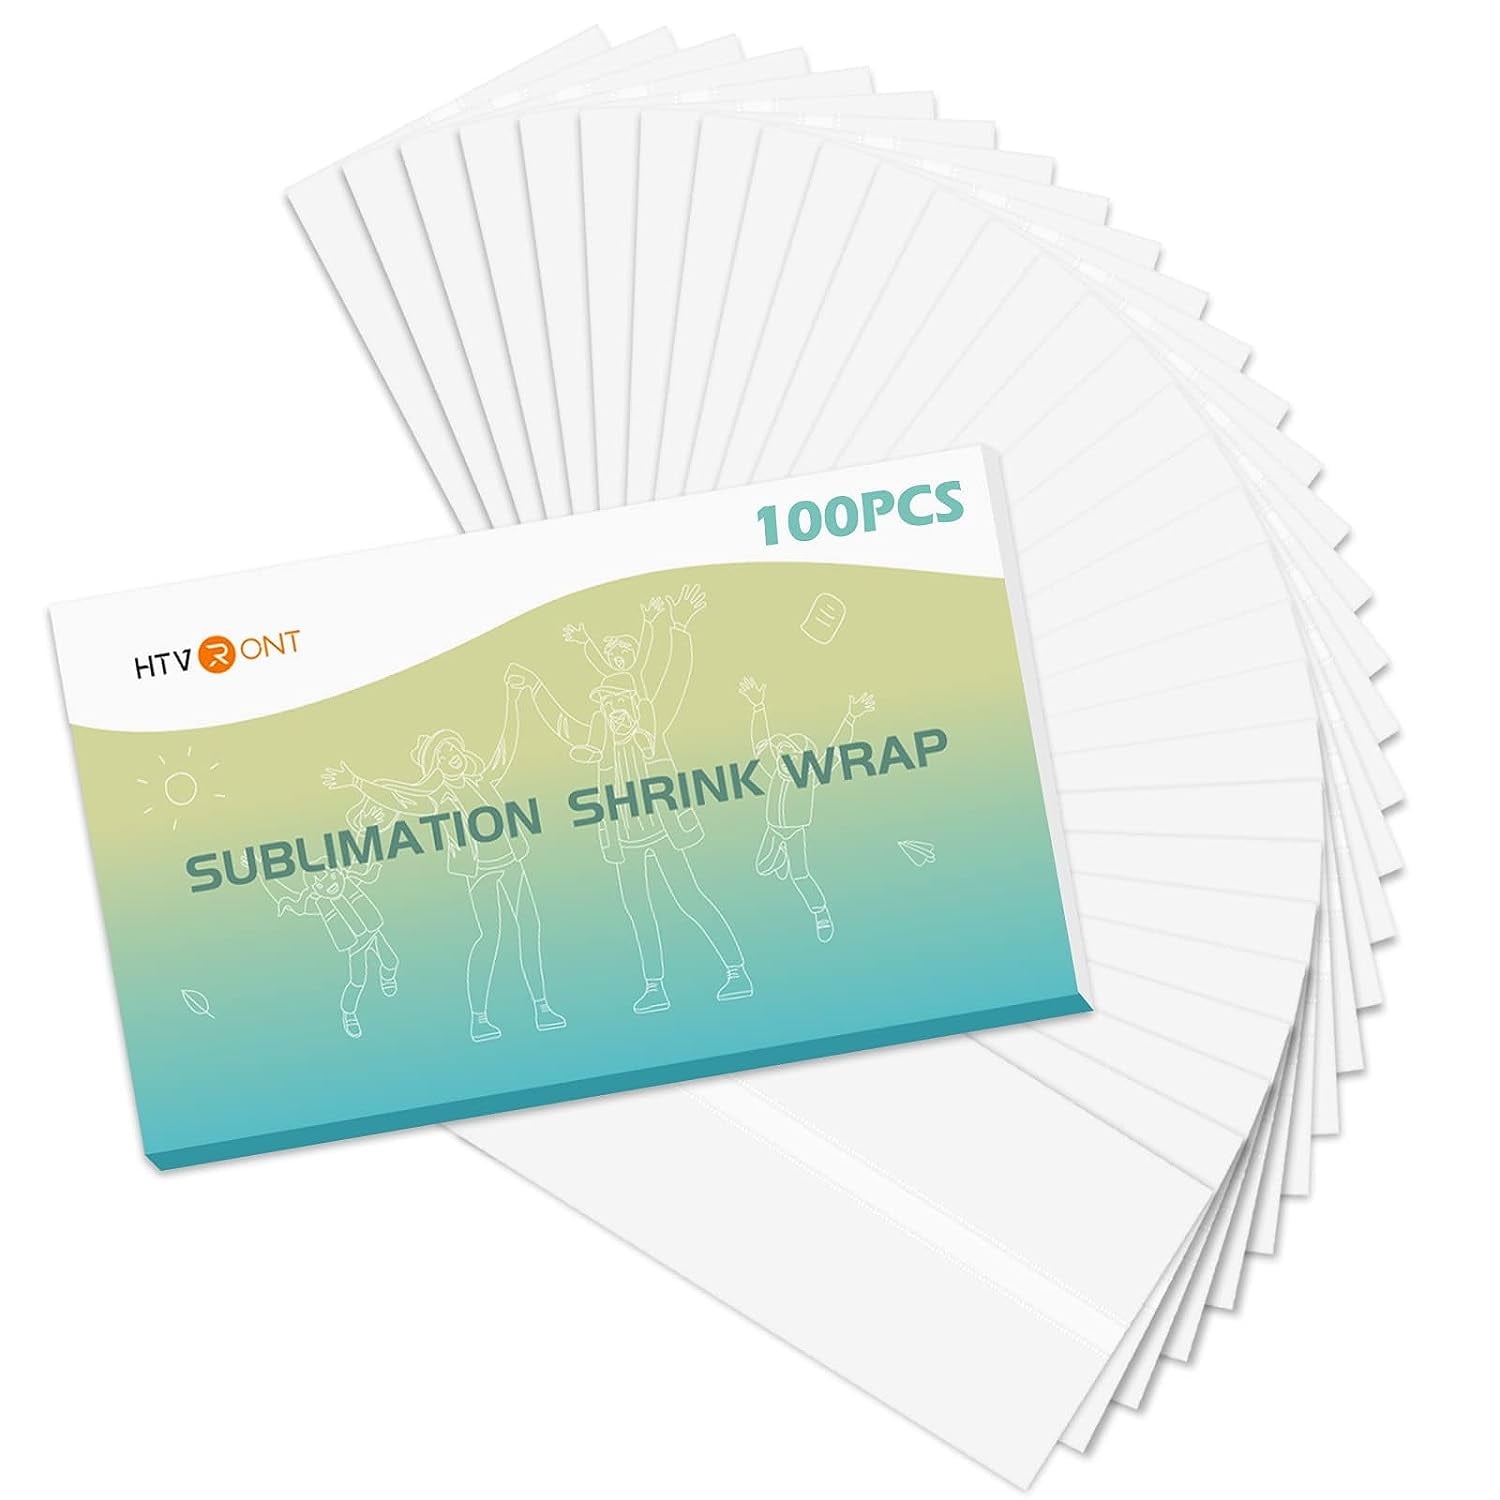 WHAT WORKS BETTER FOR SUBLIMATION: SHRINK WRAP OR SILICONE SLEEVE